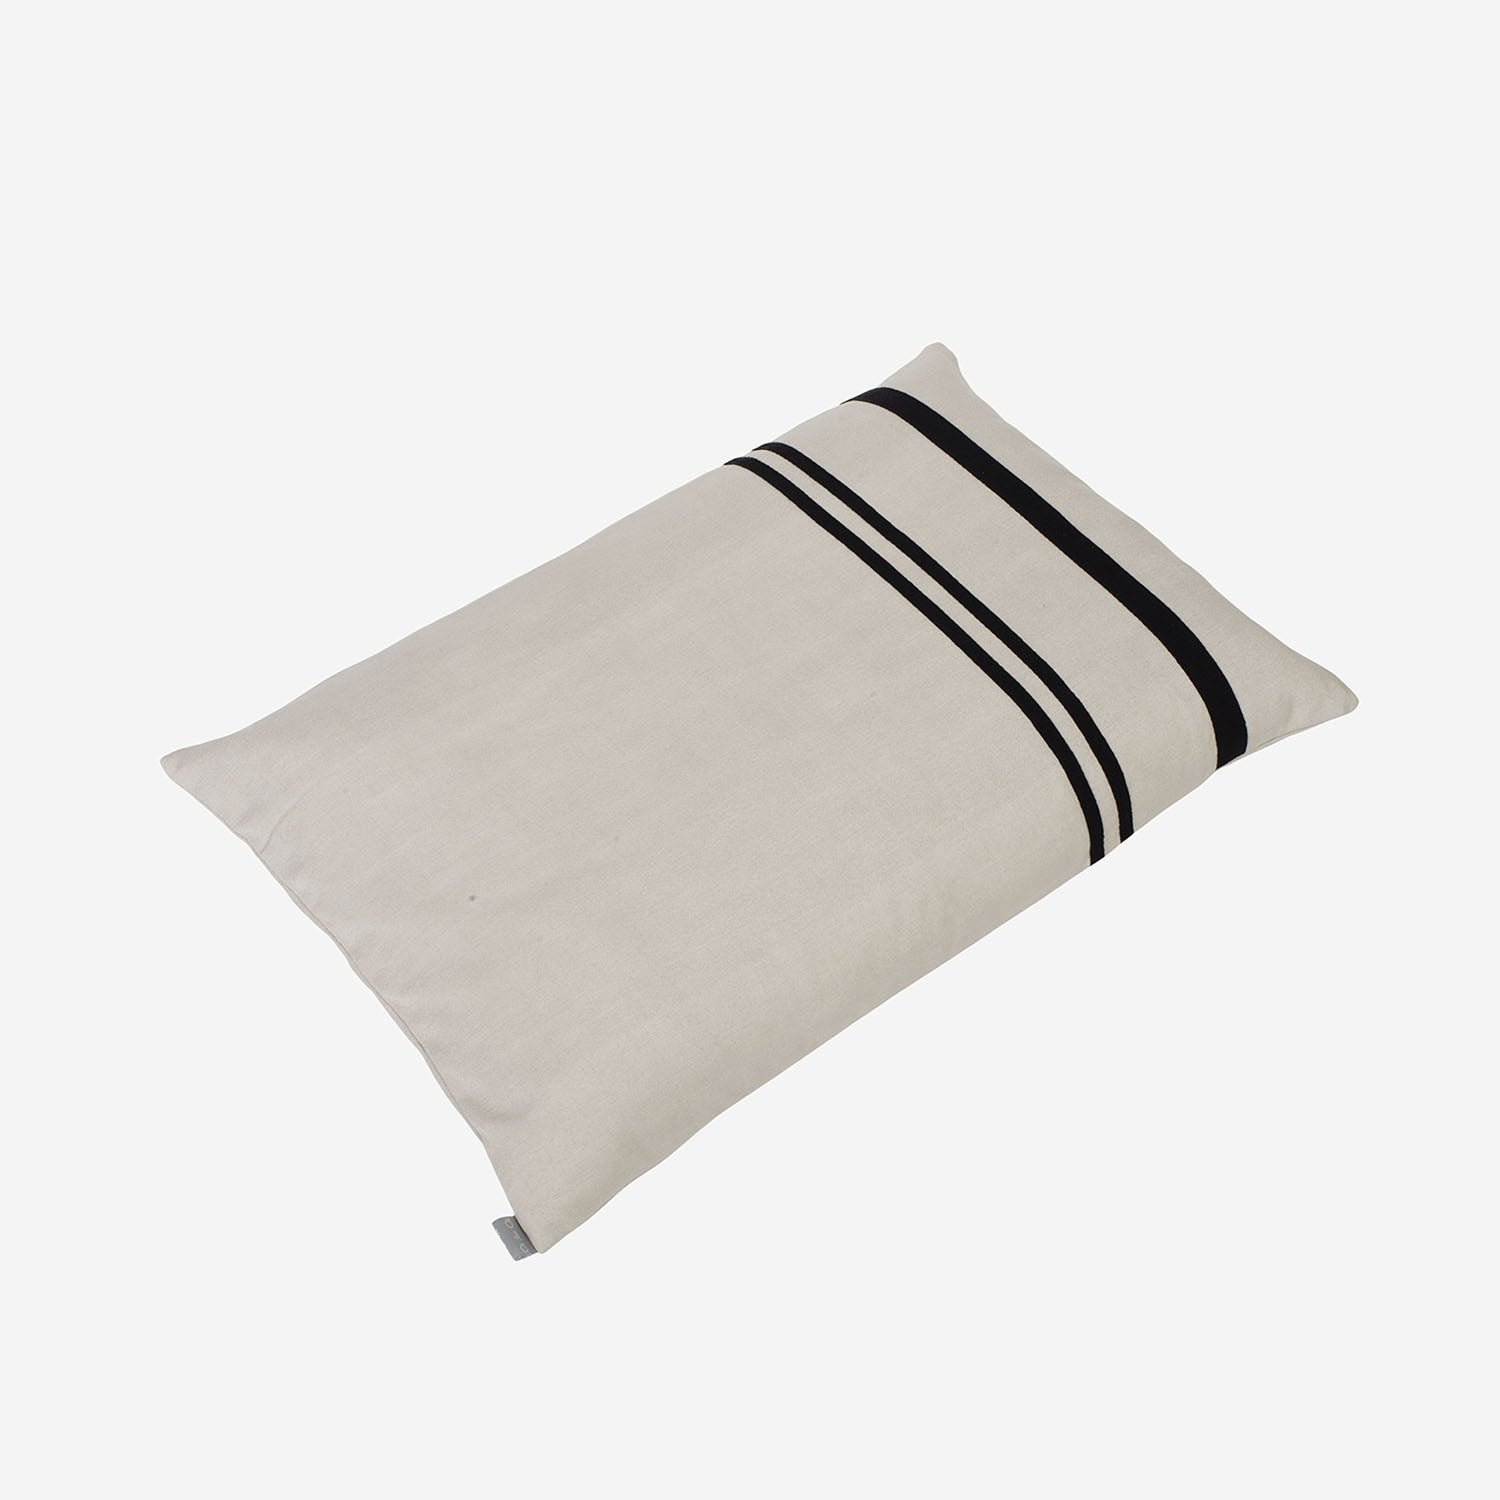 Pillow Cover in RawSilk Sand Color with Wide and Thin Black Ribbon – Oi Soi  Oi